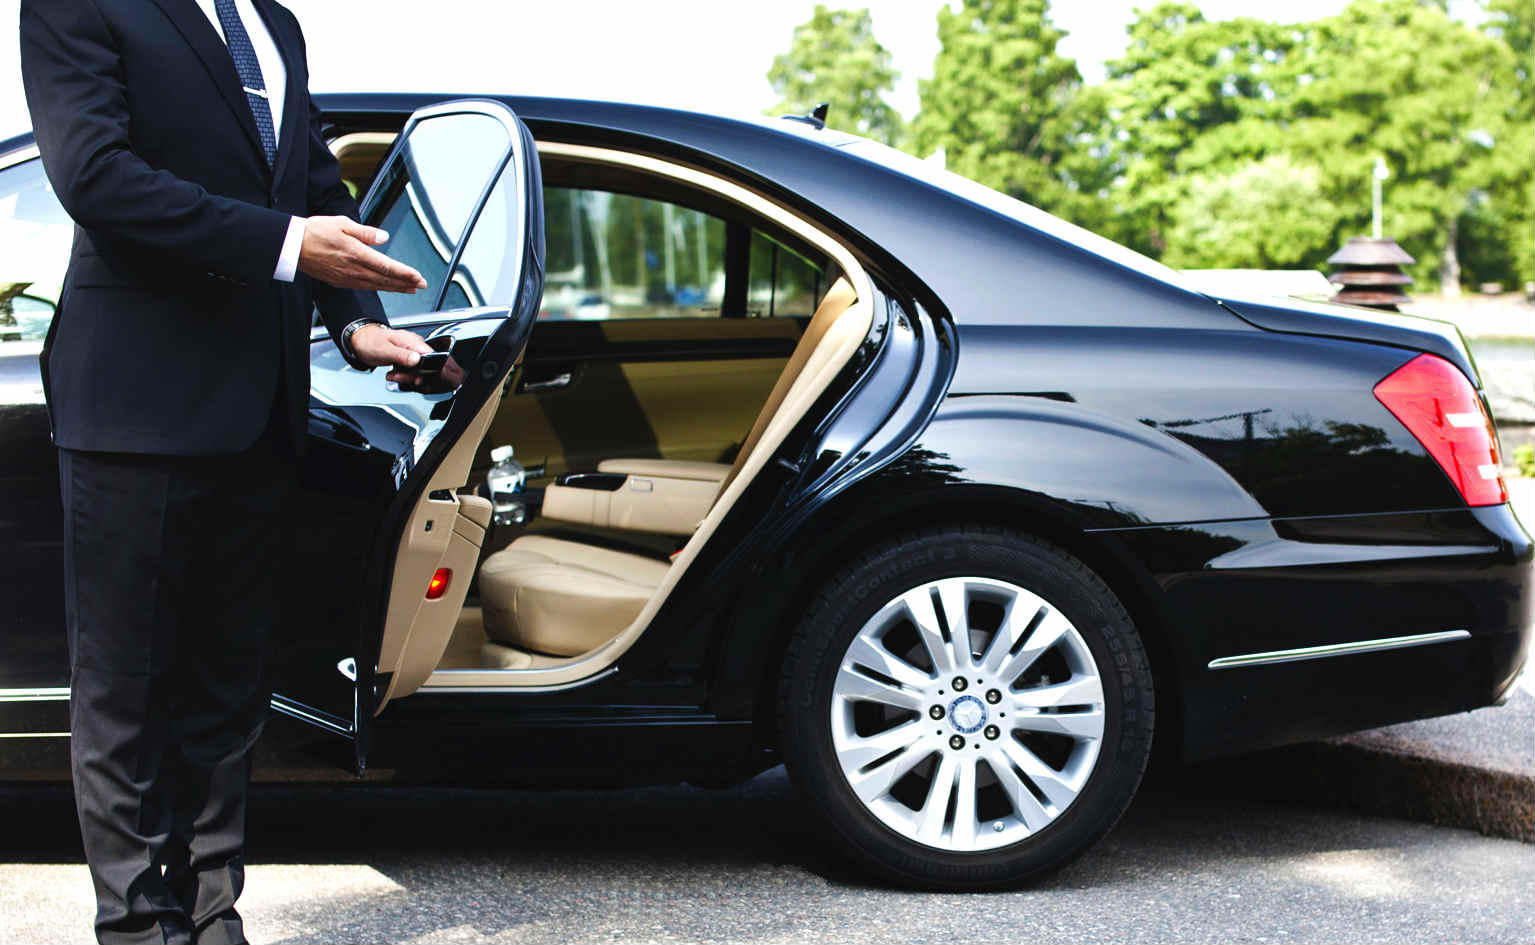 Get services from the professional chauffeur.